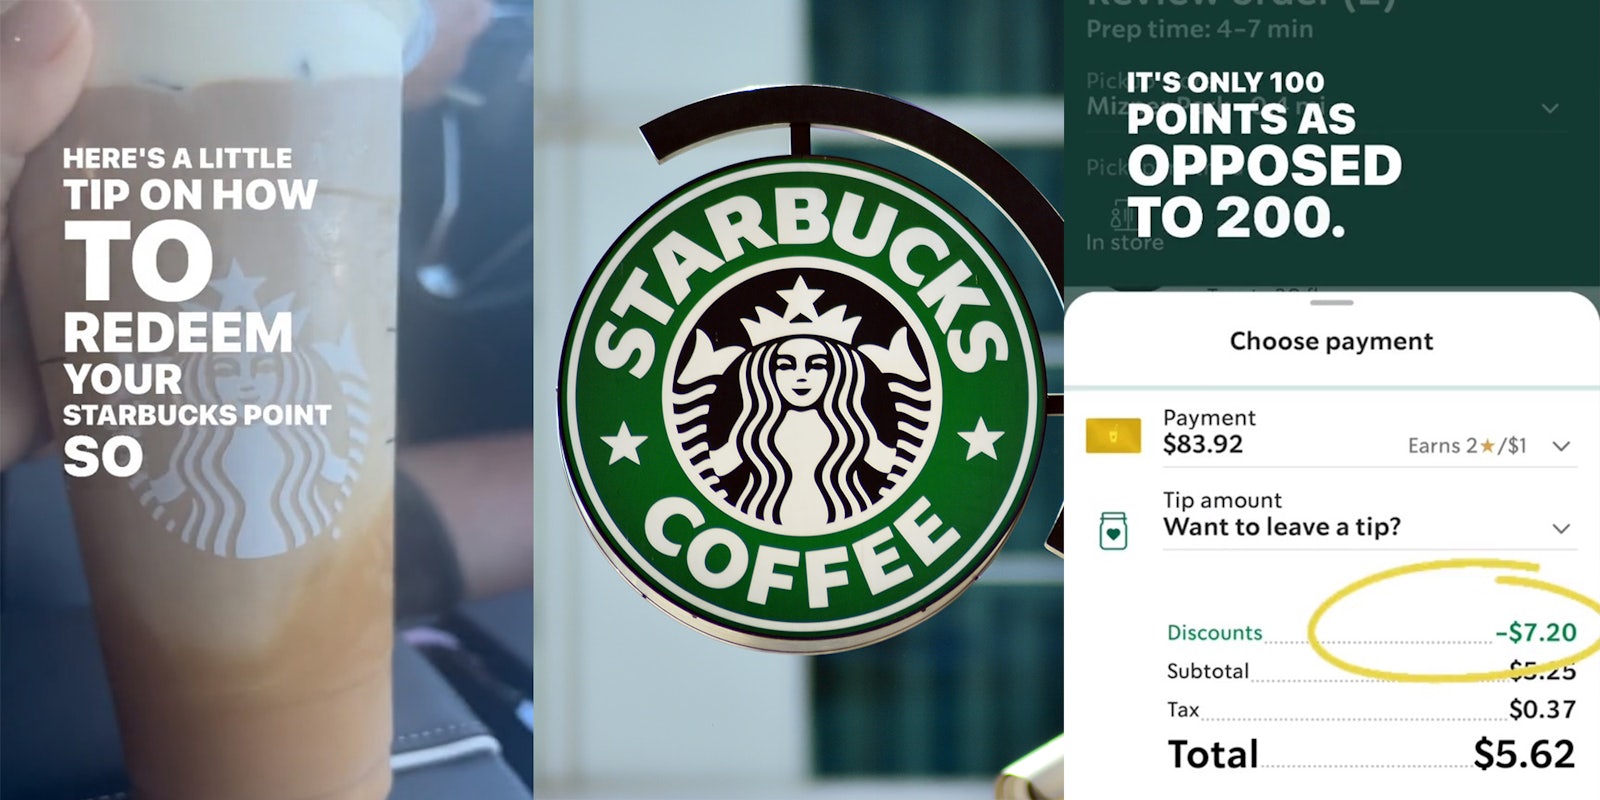 Customer shares how to redeem 'most expensive' Starbucks drink for only 100 stars